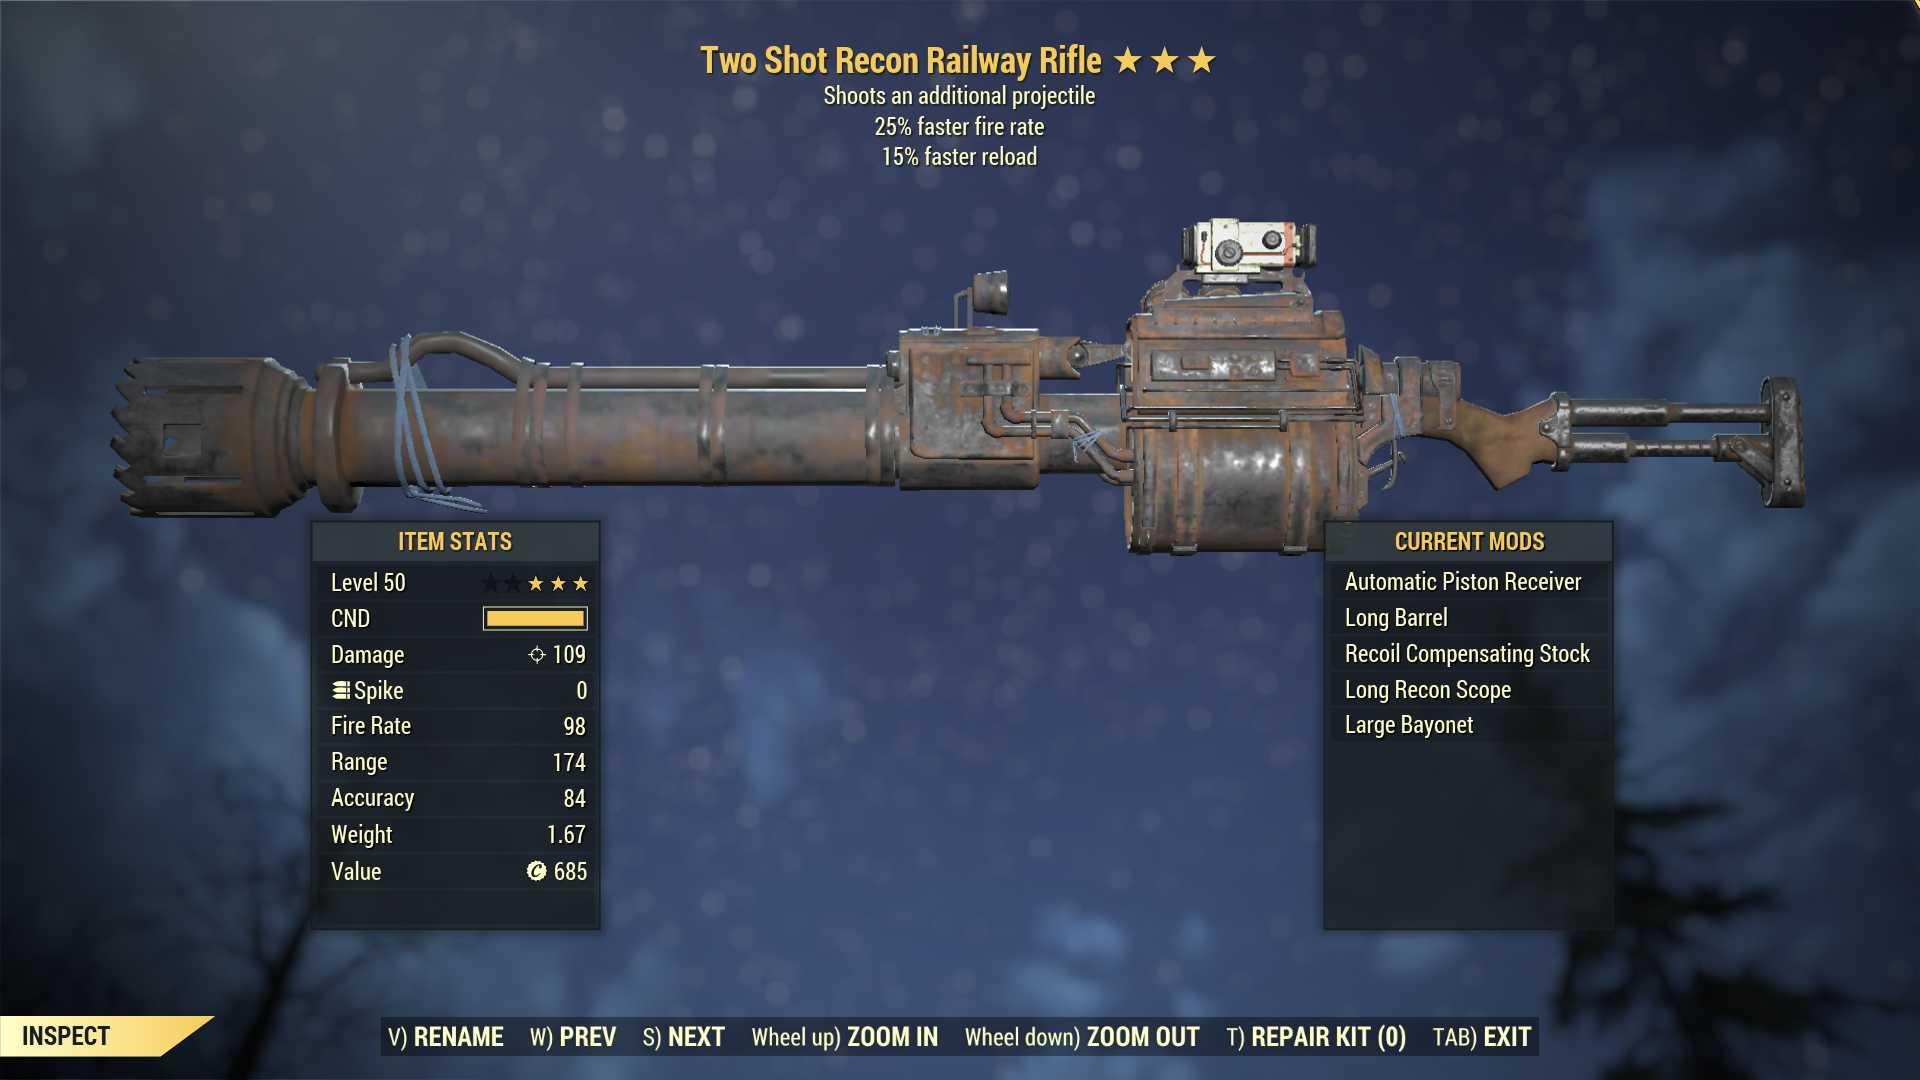 Two Shot Railway (25% faster fire rate, 15% faster reload)